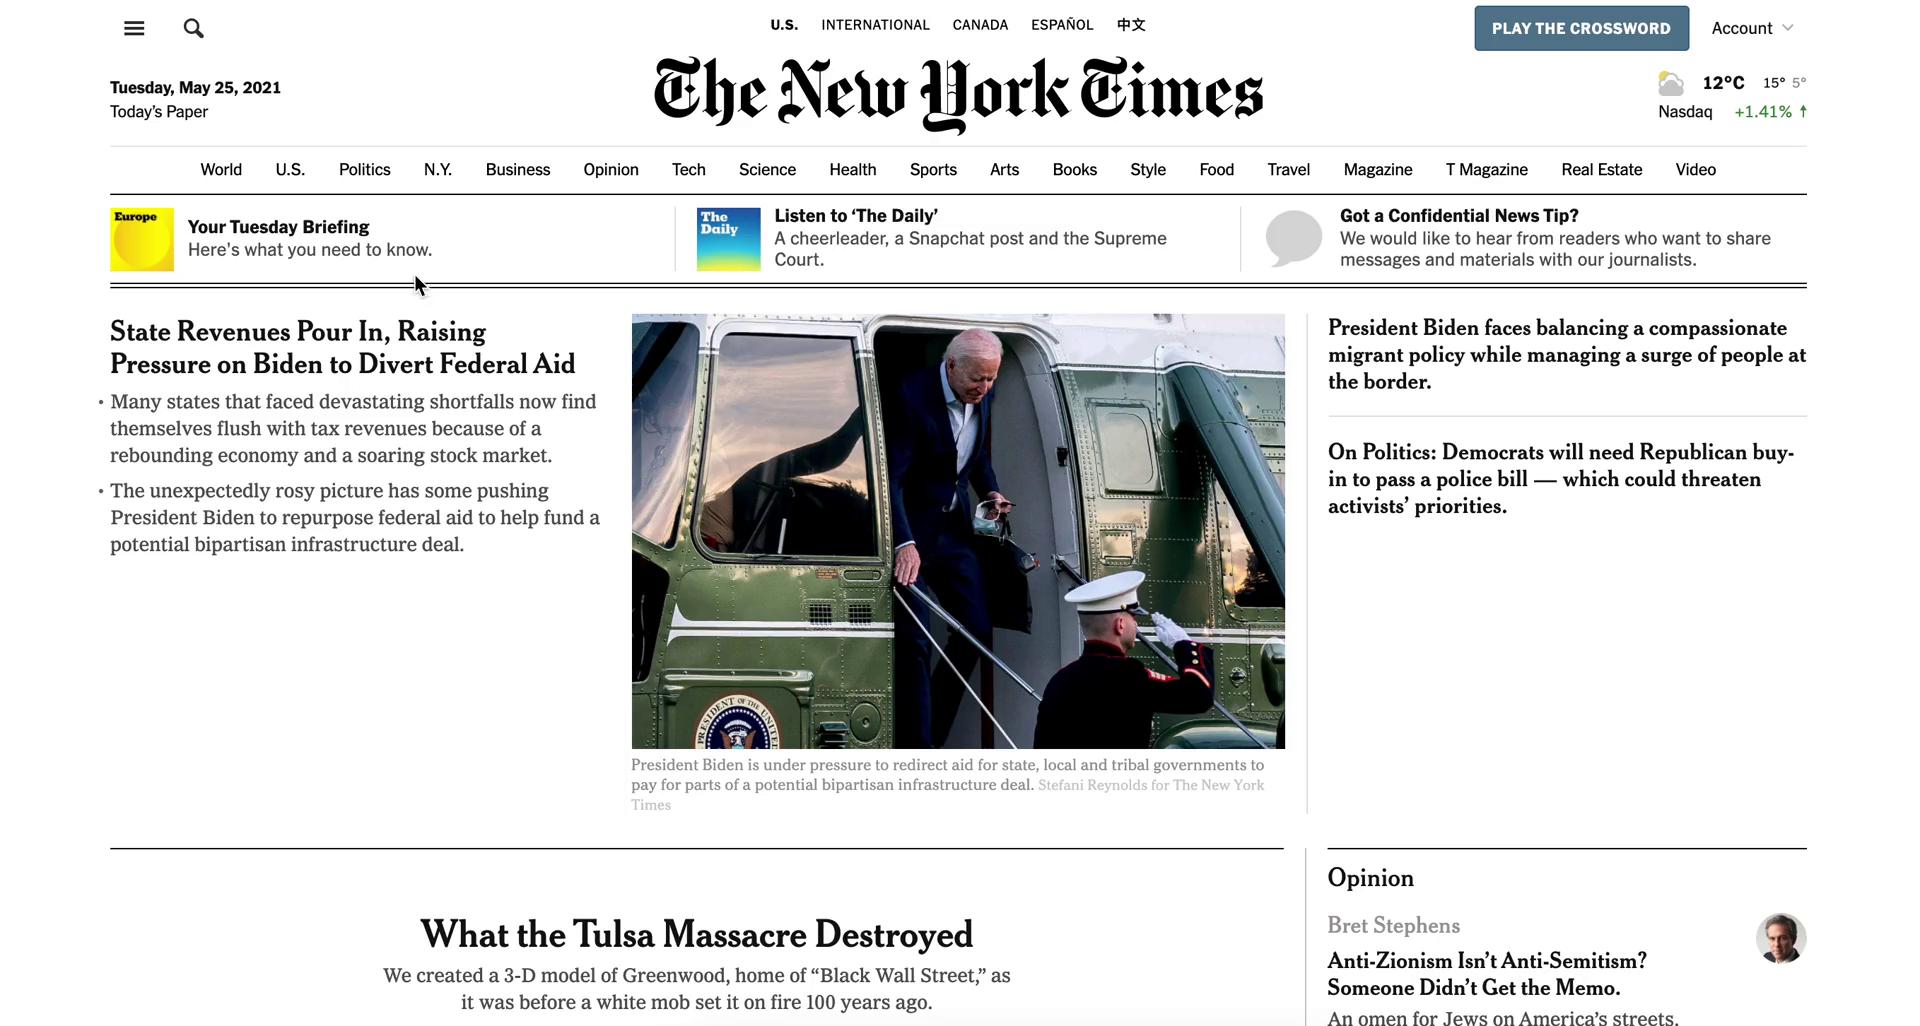 Discovering content on The New York Times video screenshot